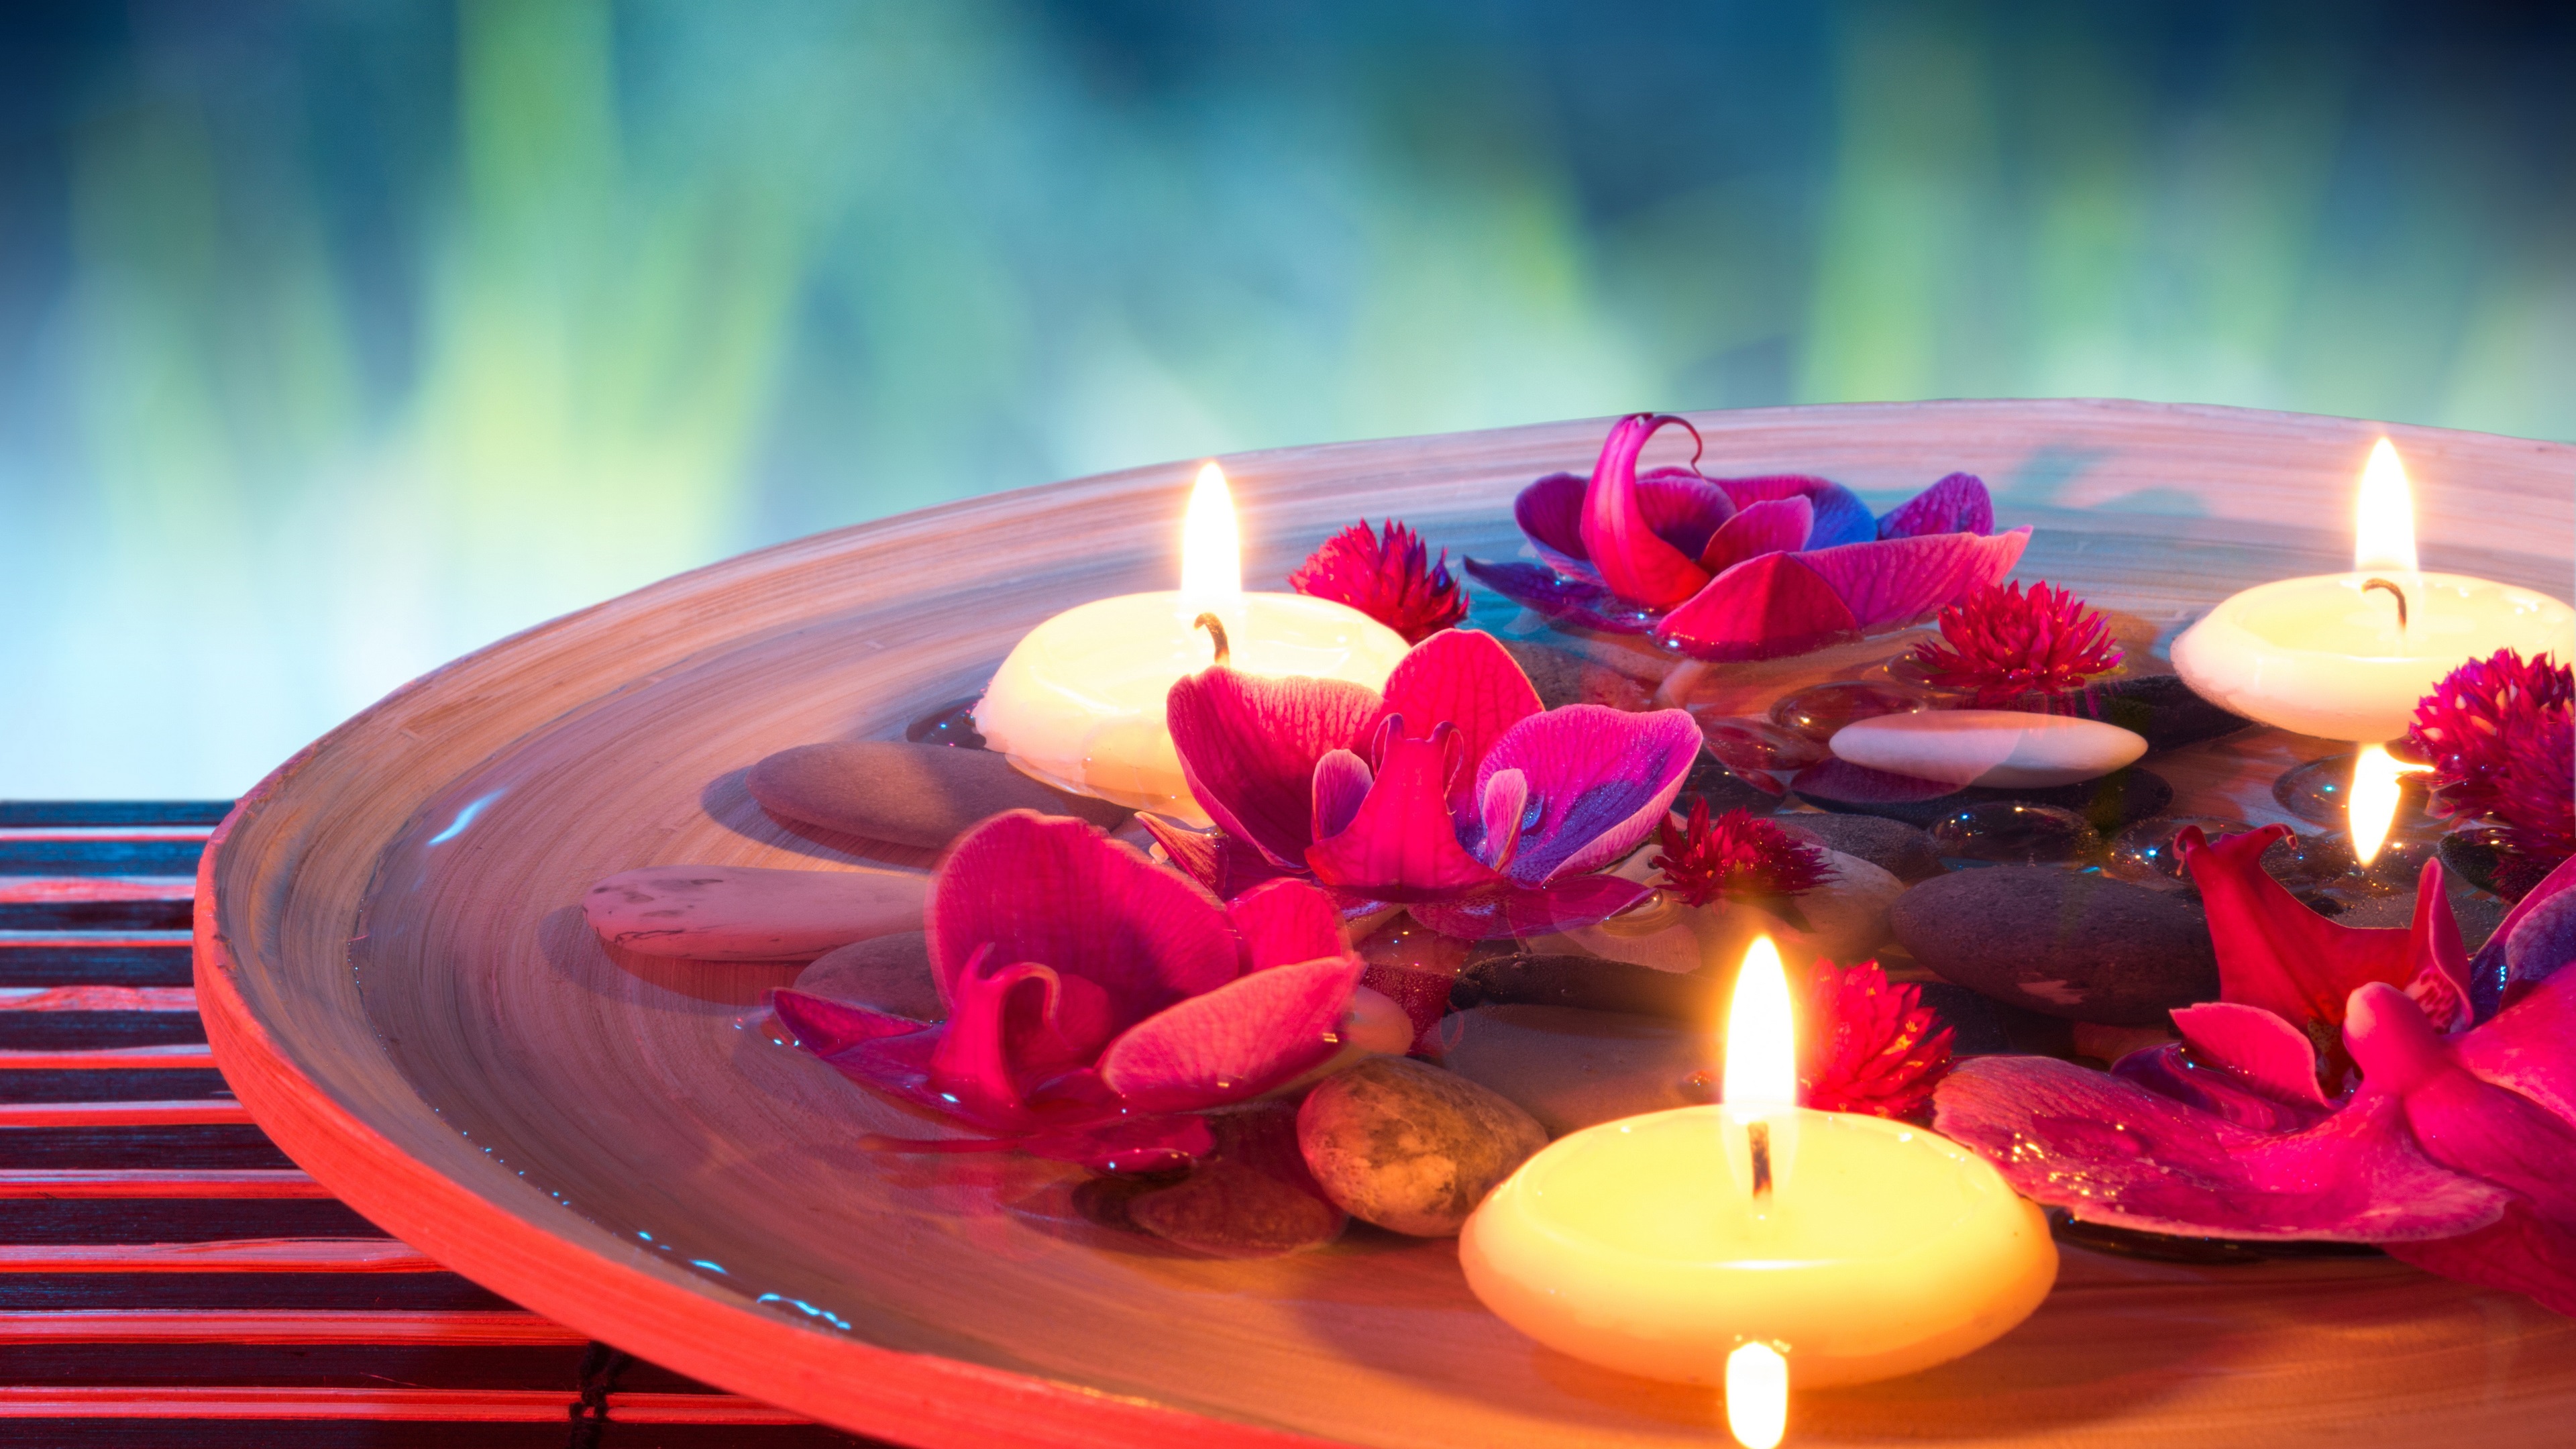 287,956 Candle Flower Background Images, Stock Photos & Vectors |  Shutterstock